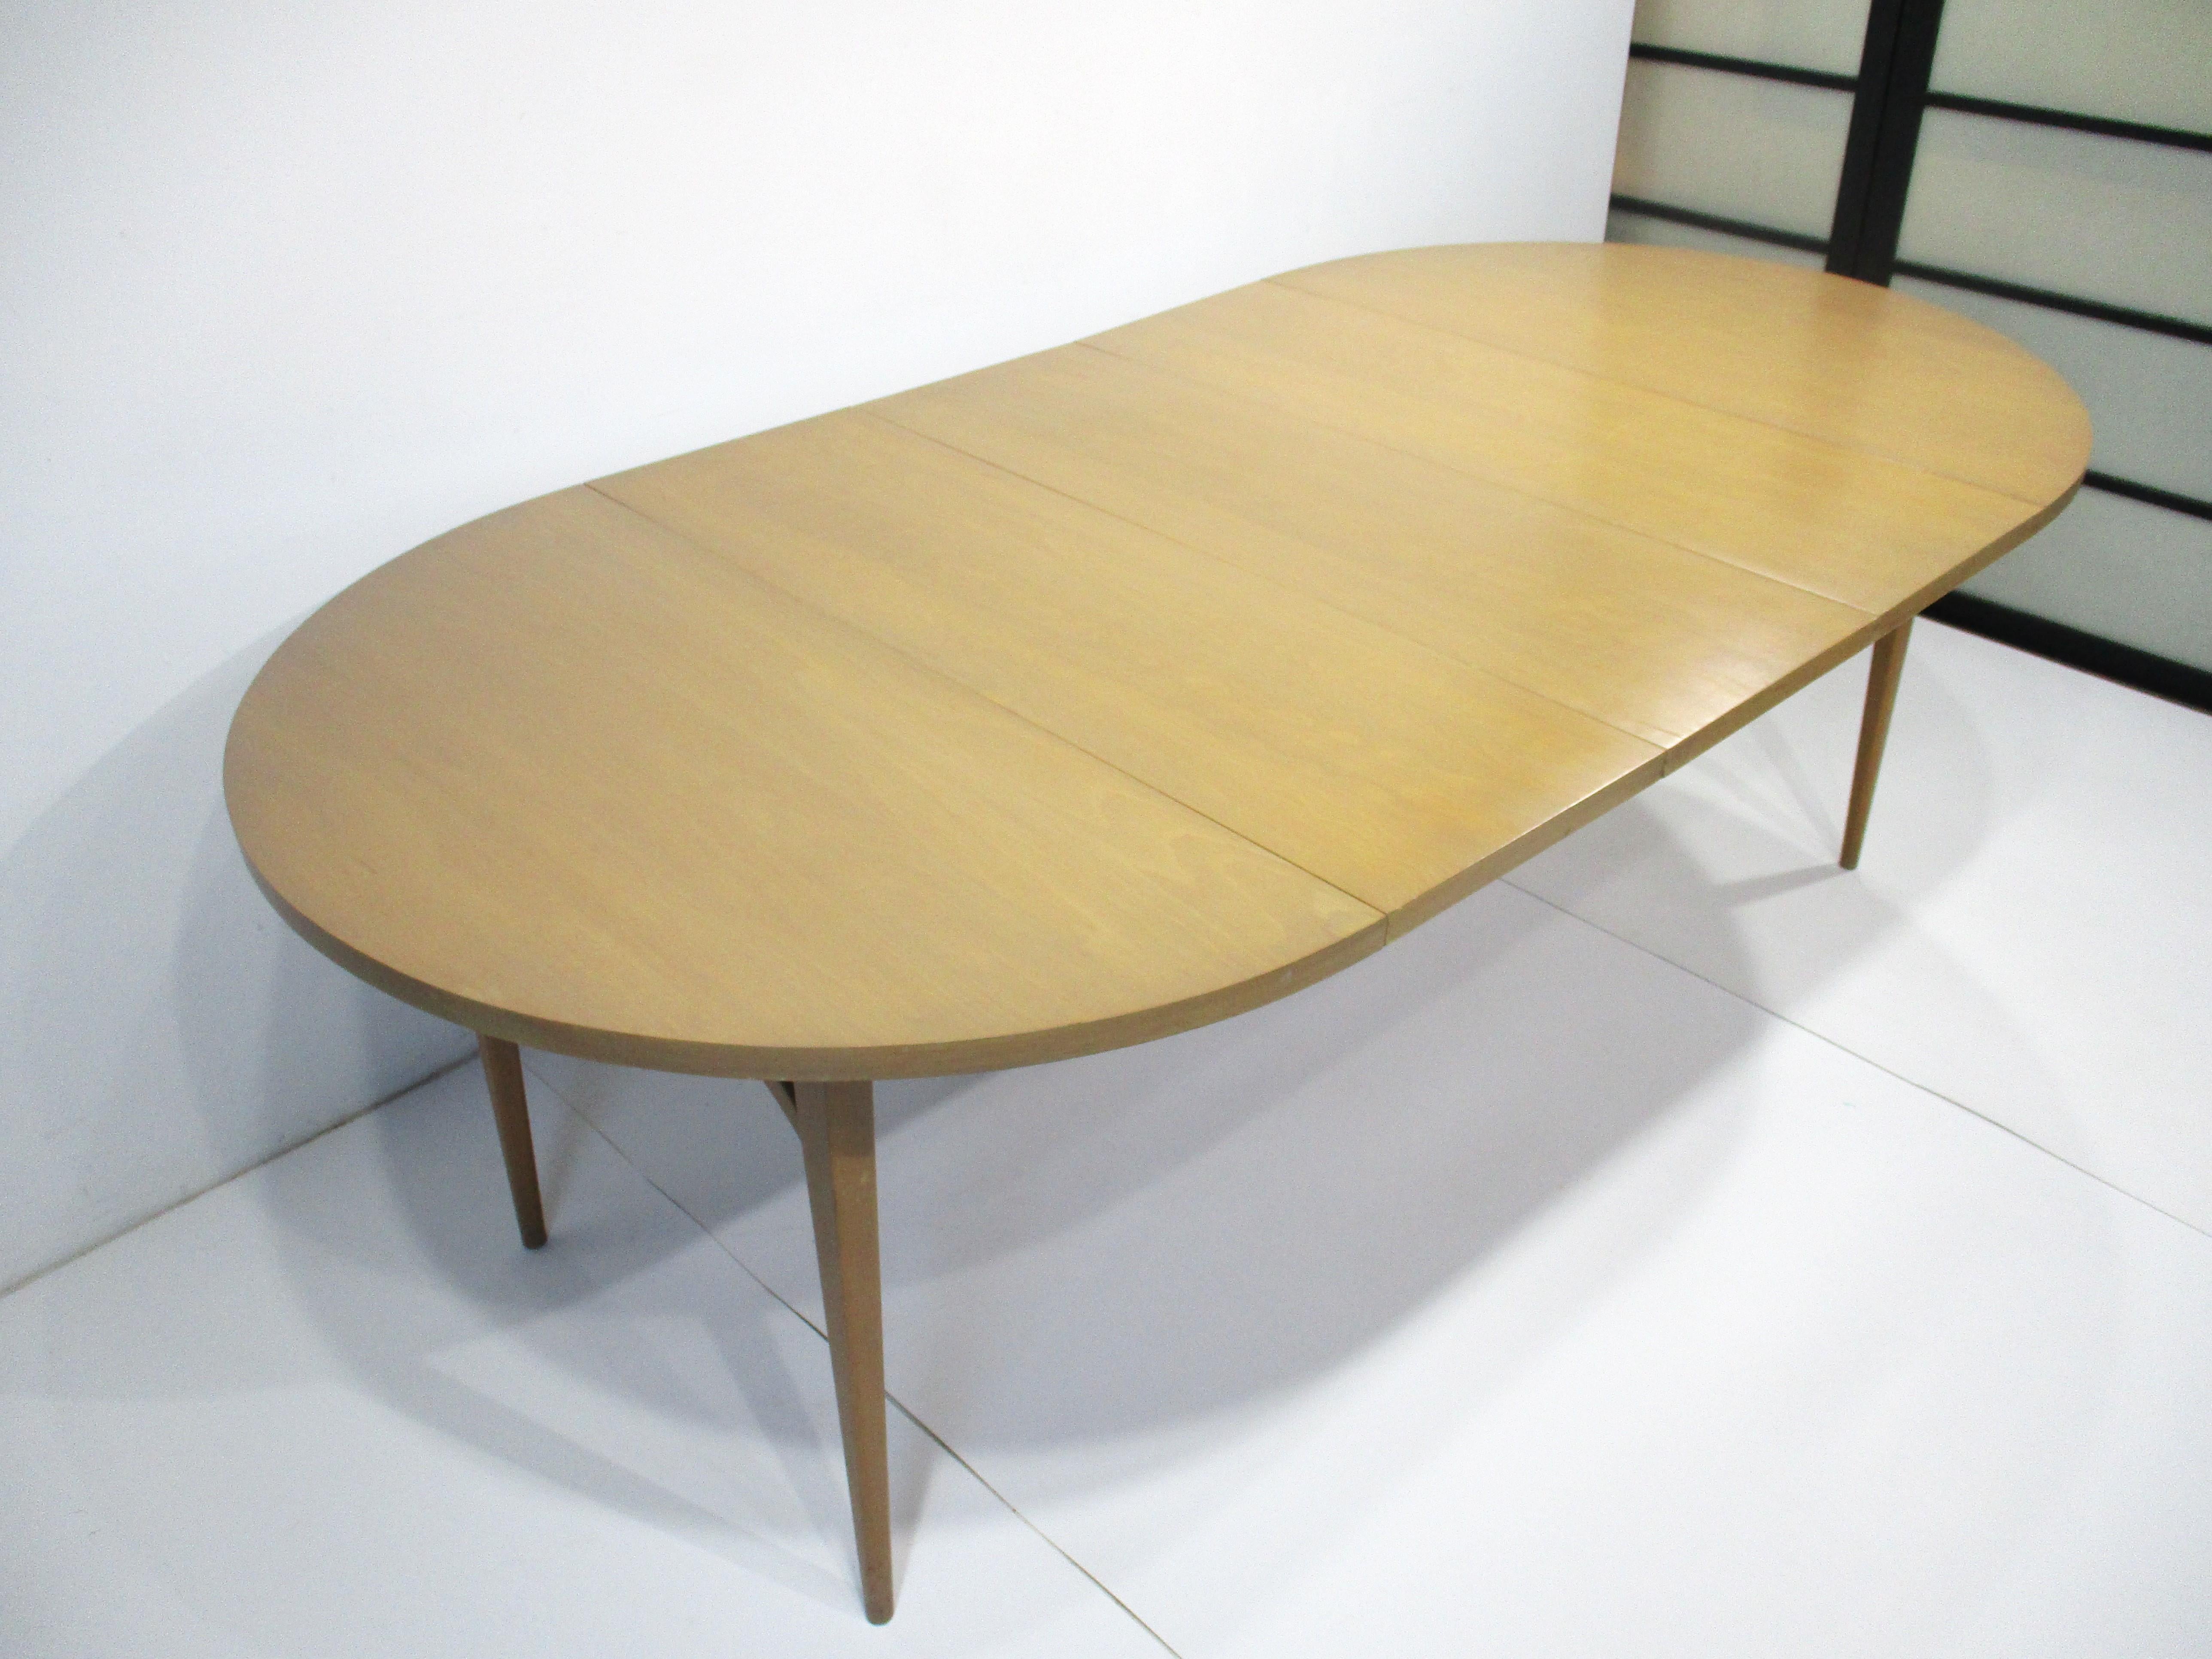 20th Century Paul McCobb Dining Table from the Perimeter Group Collection  For Sale